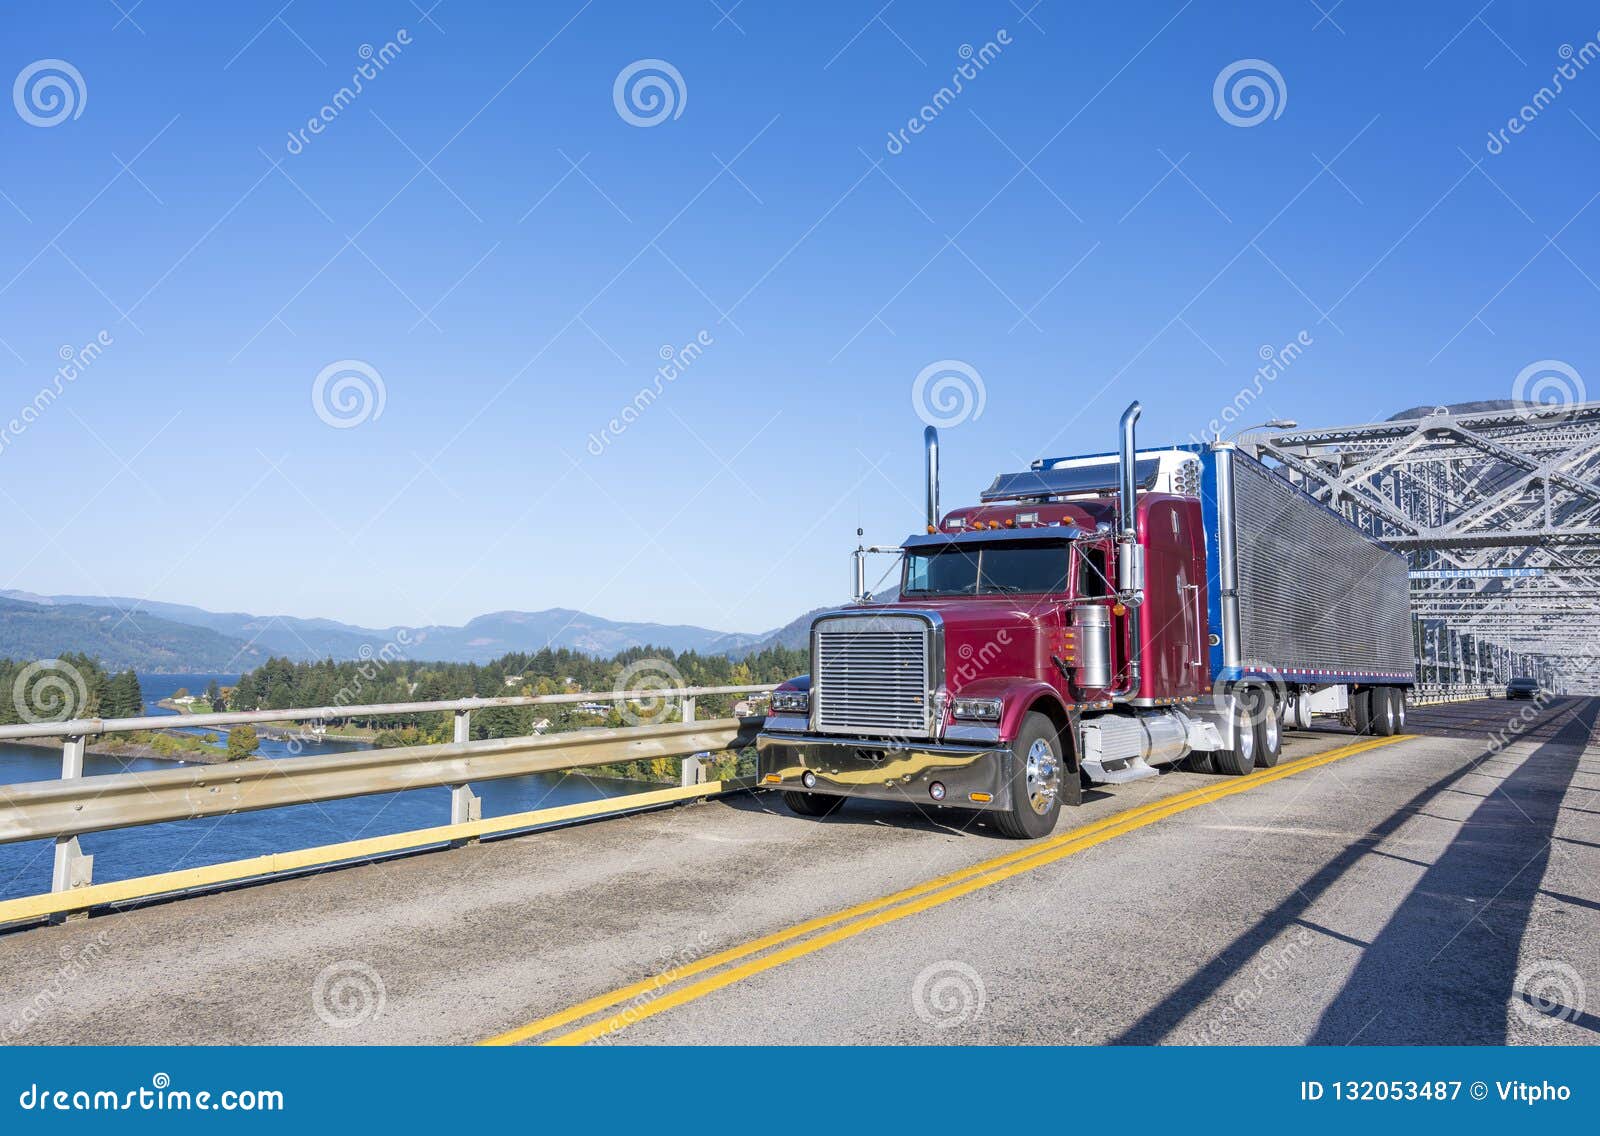 Burgundy Big Rig Classic Semi Truck with Refrigerated Shiny Semi Stock Image - Image of freight